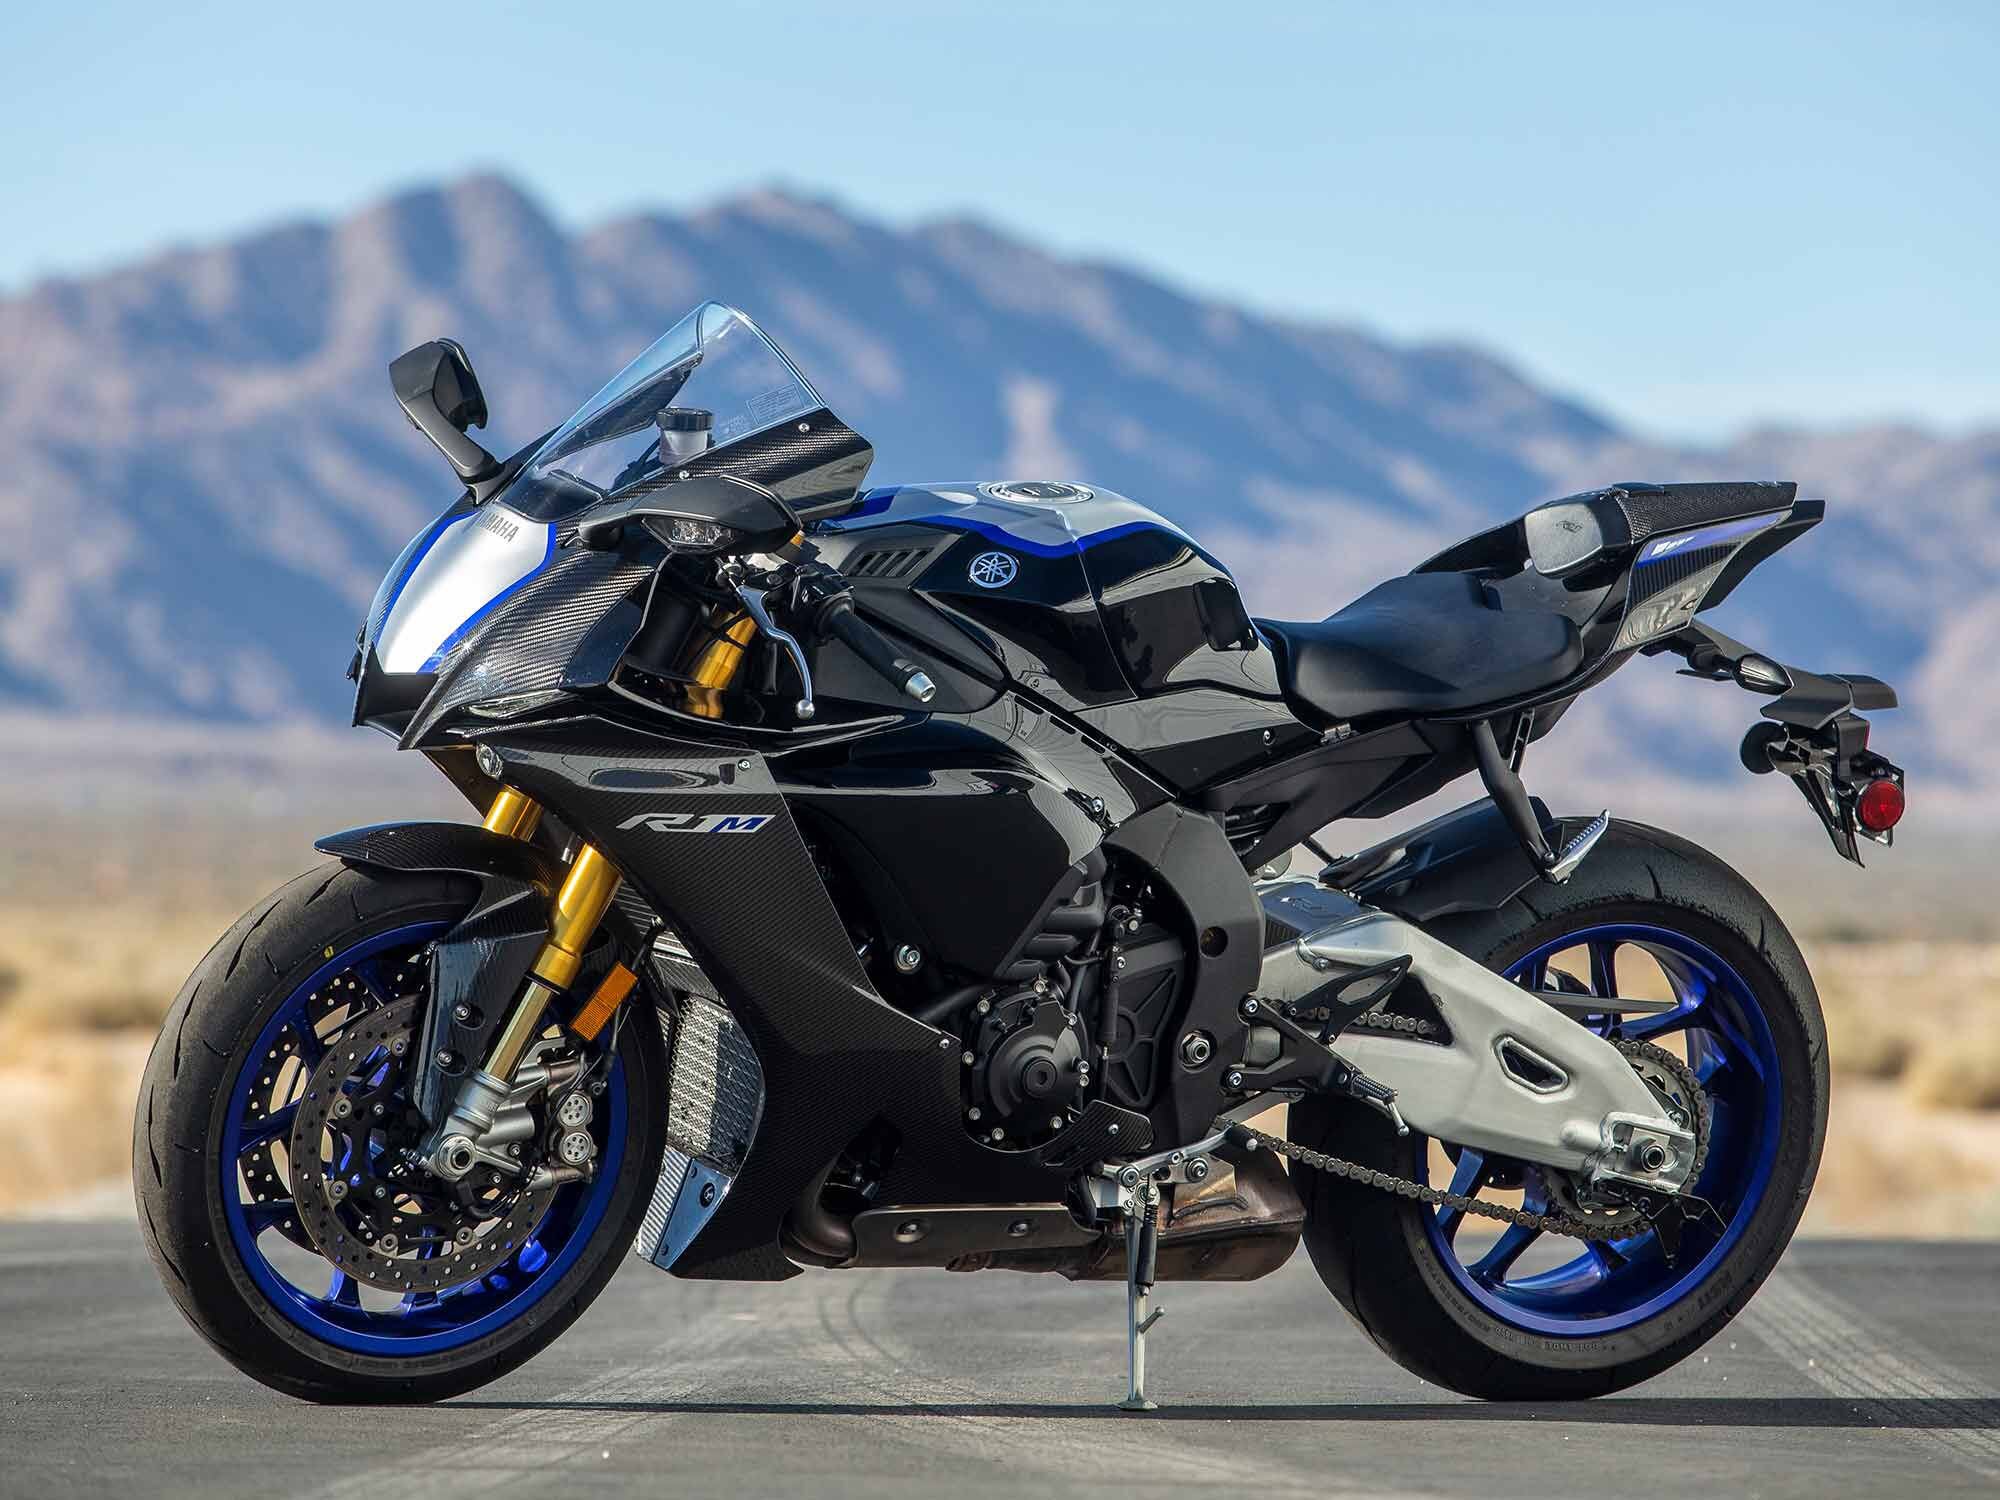 Yamaha’s 2021 YZF-R1M ($26,099) continues to be pure excellence. We love the function and versatility of its Öhlins semi-active suspension.